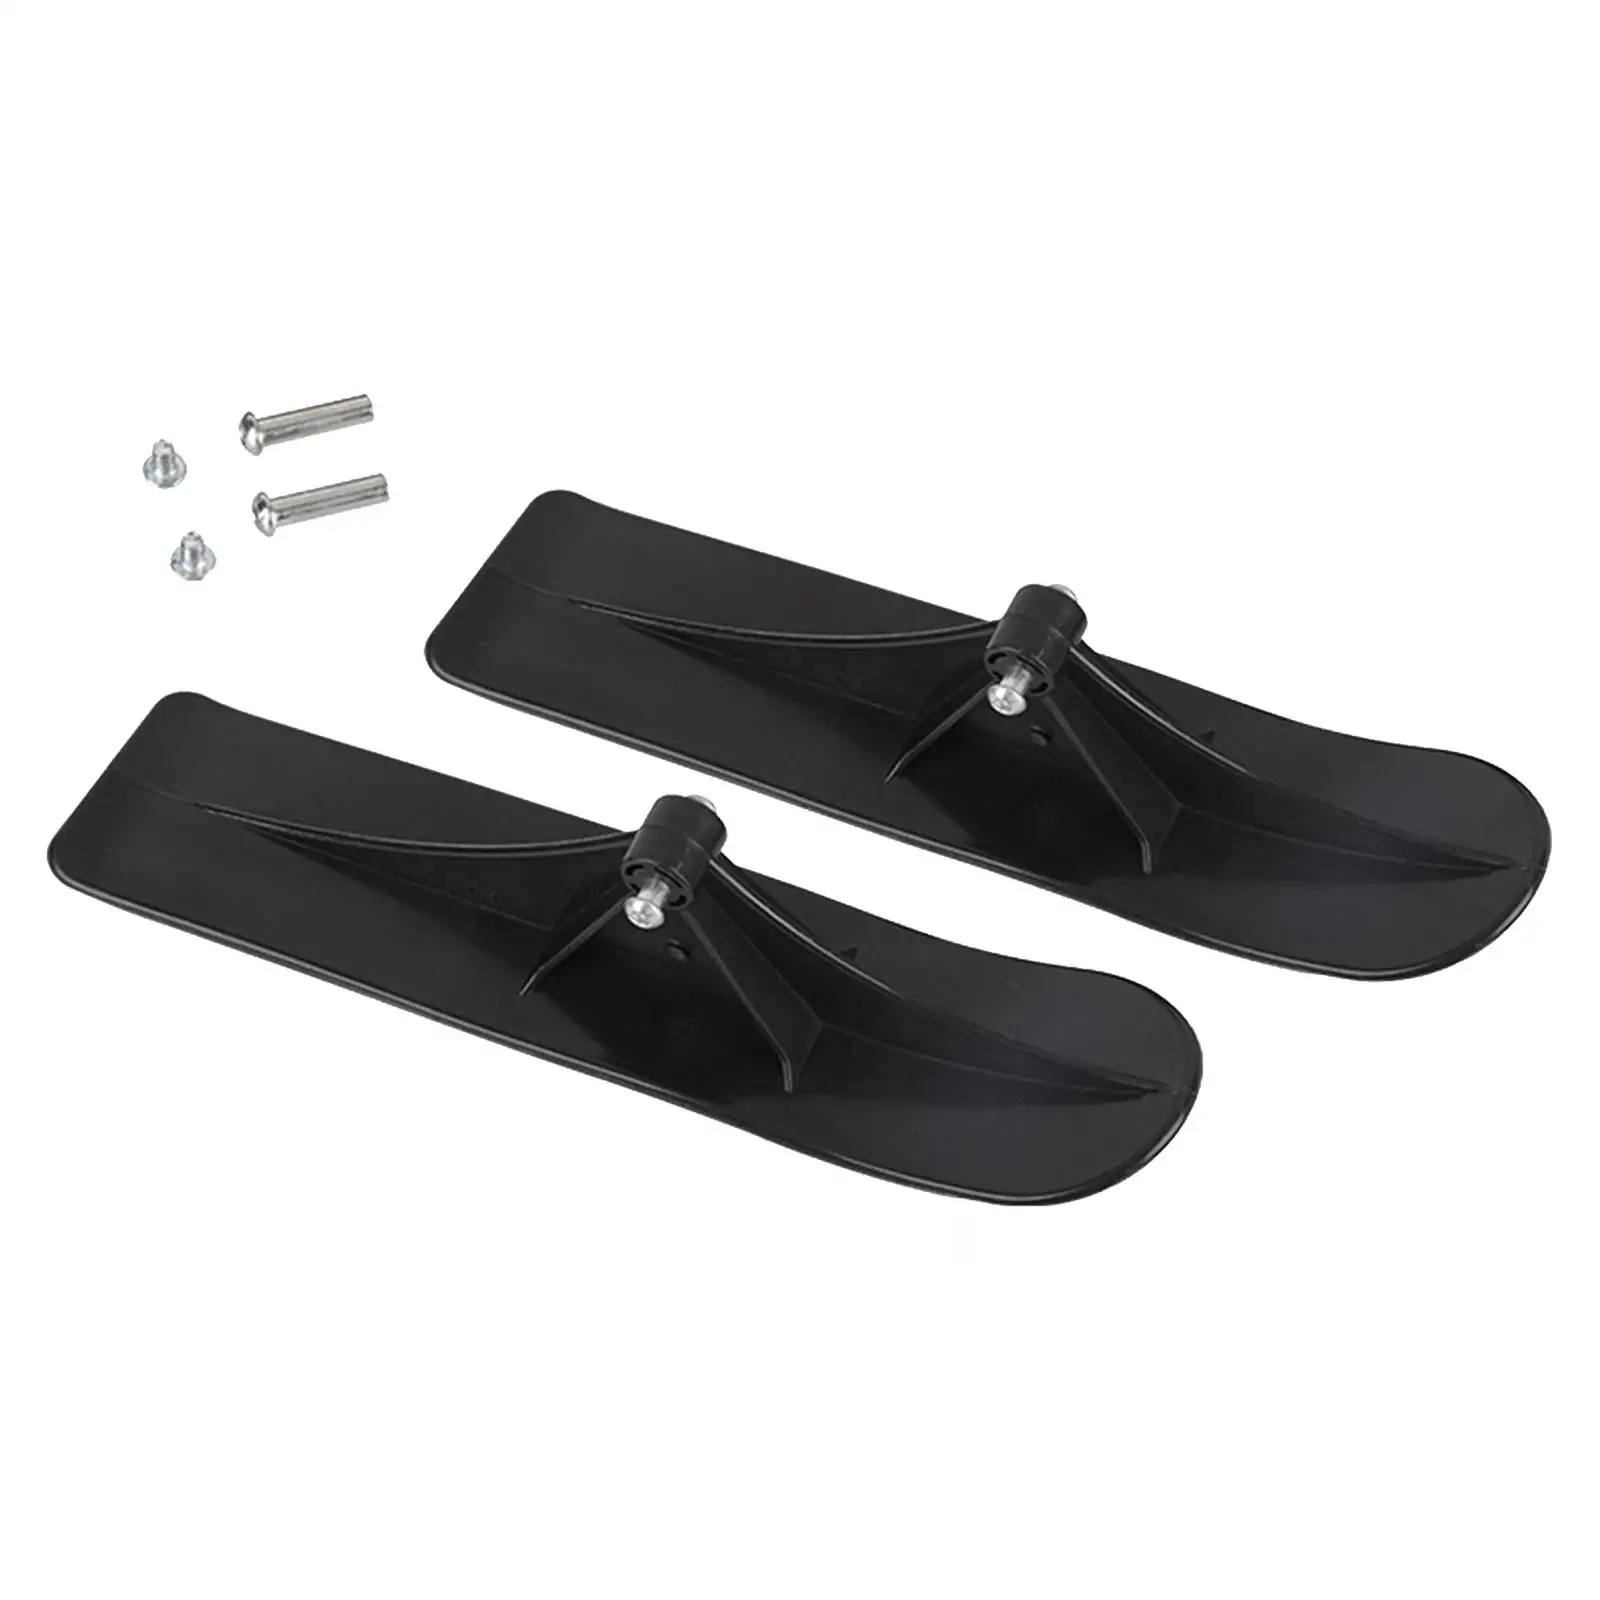 Ski Scooter Sleigh Toboggan Snowmobile Attachment Durable Replacement Ski Board for Snowboard Downhill Sleds Training Novices